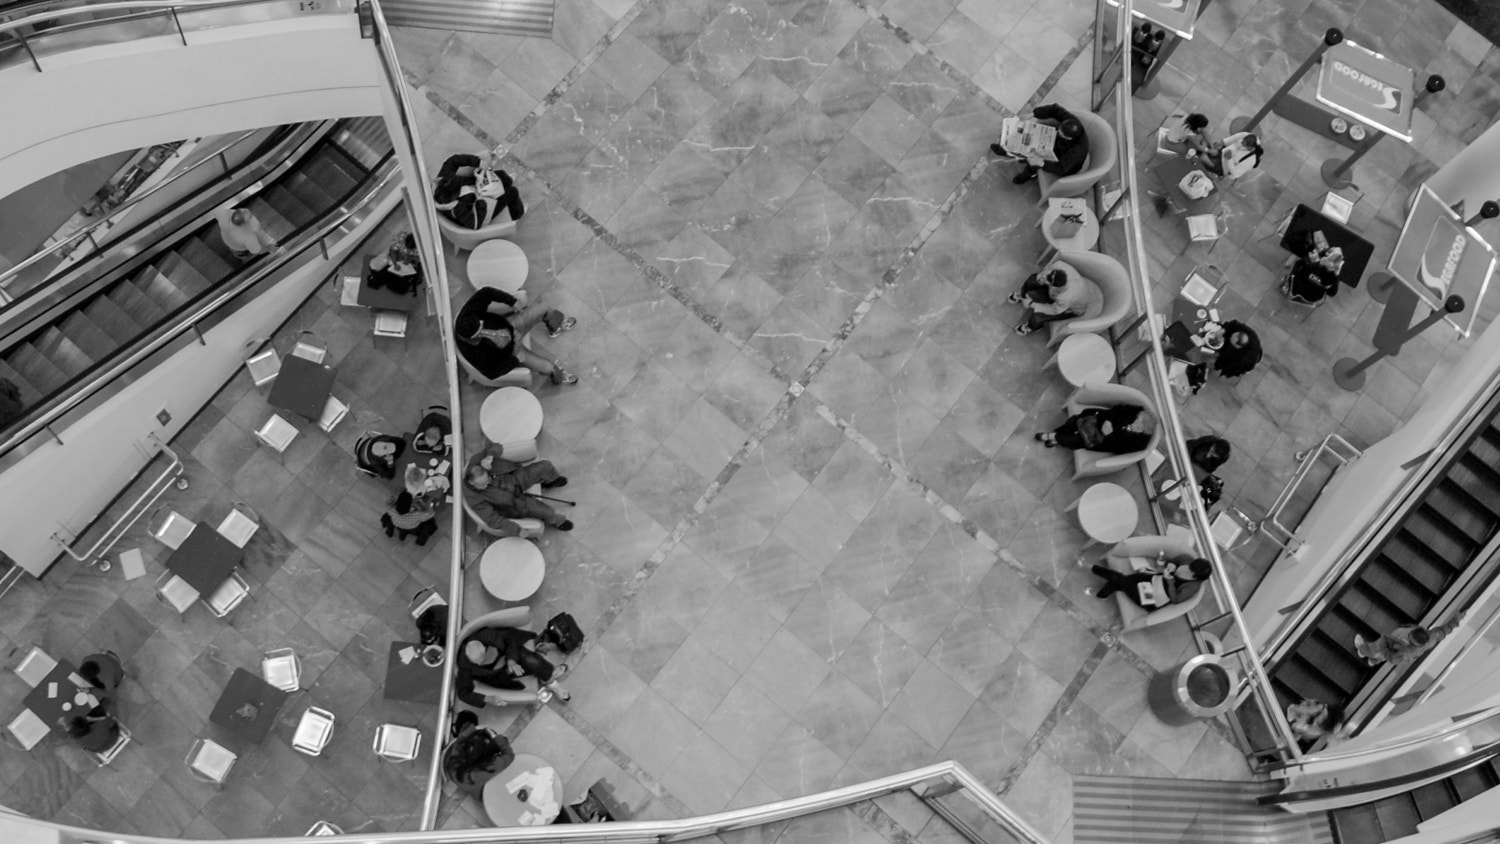 Nikon D80 sample photo. Cafe inside nordstrom's at union square in san francisco photography